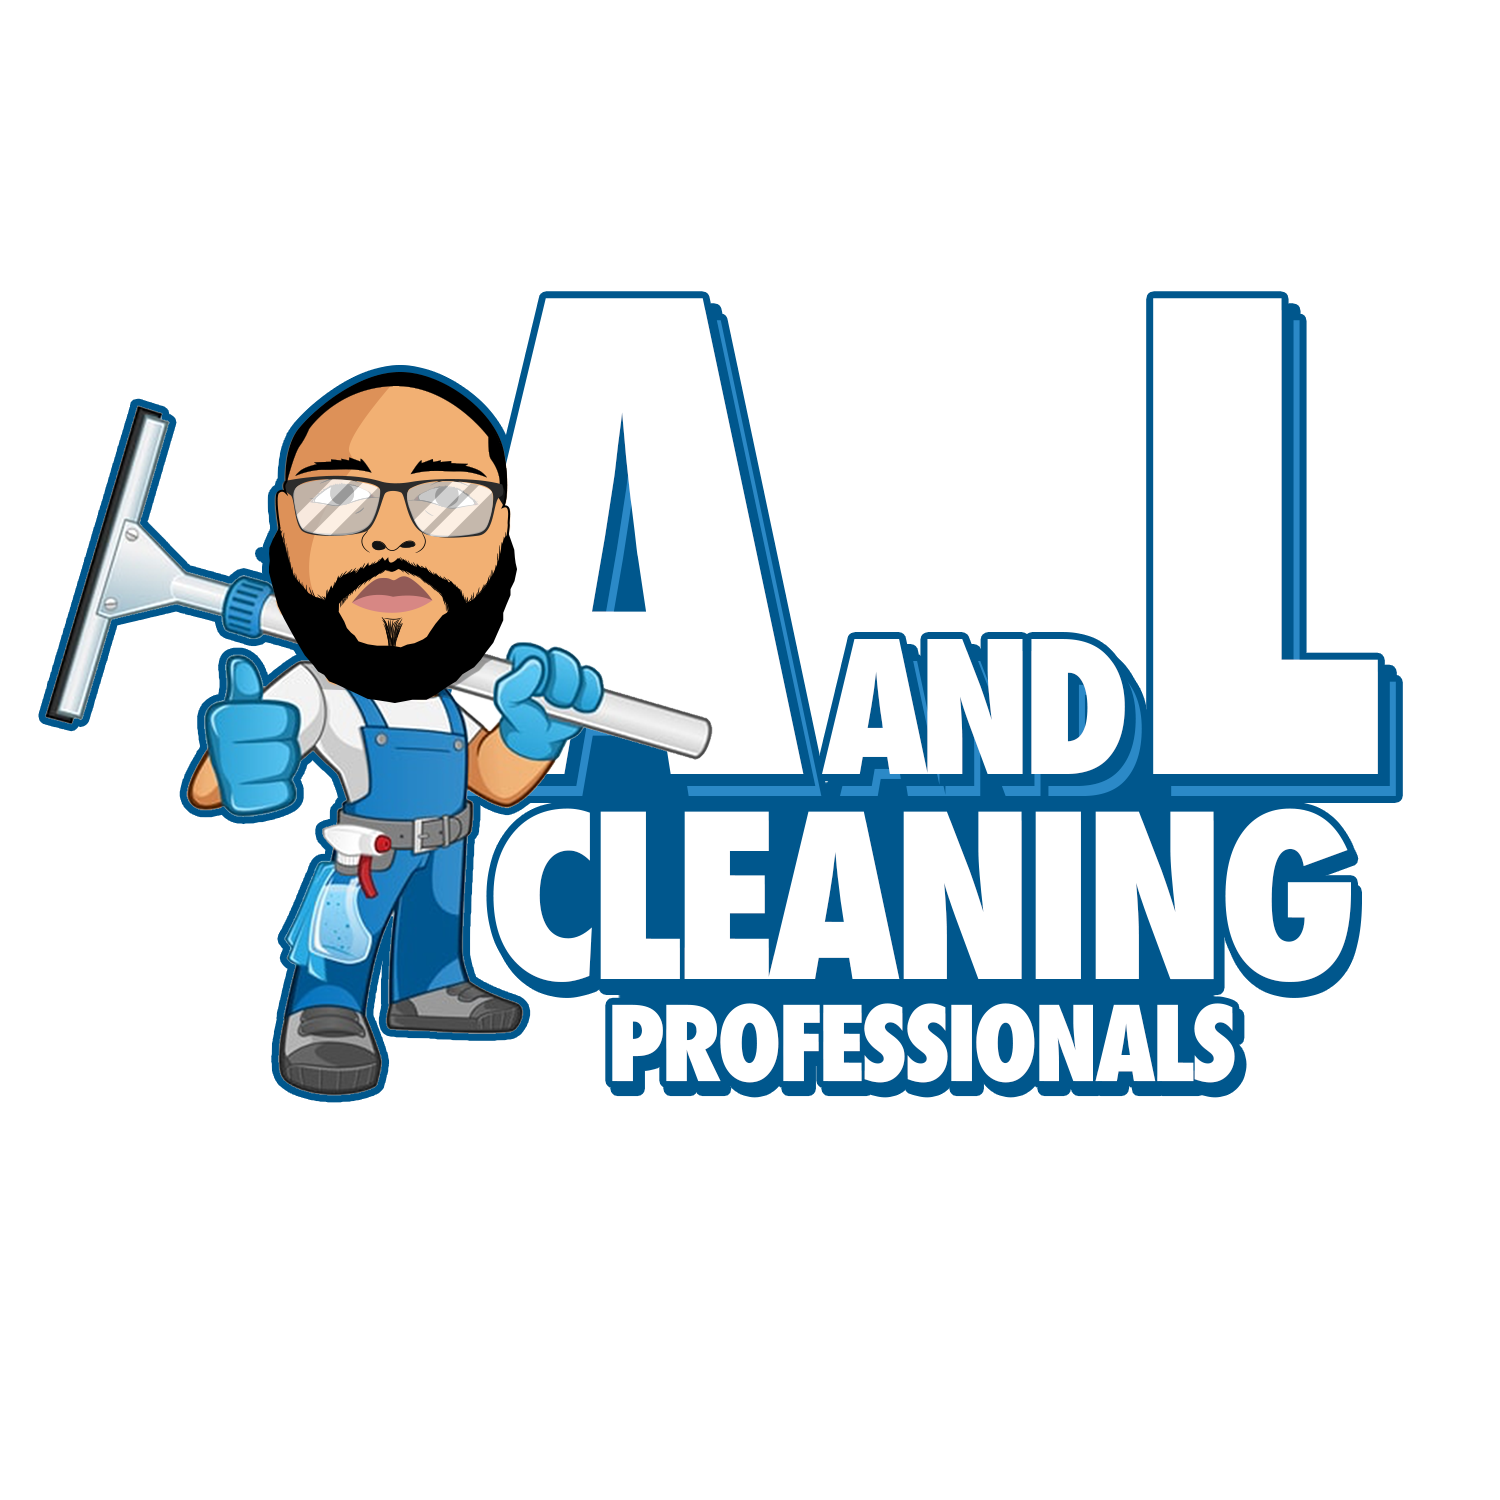 A and L Cleaning Professionals Logo